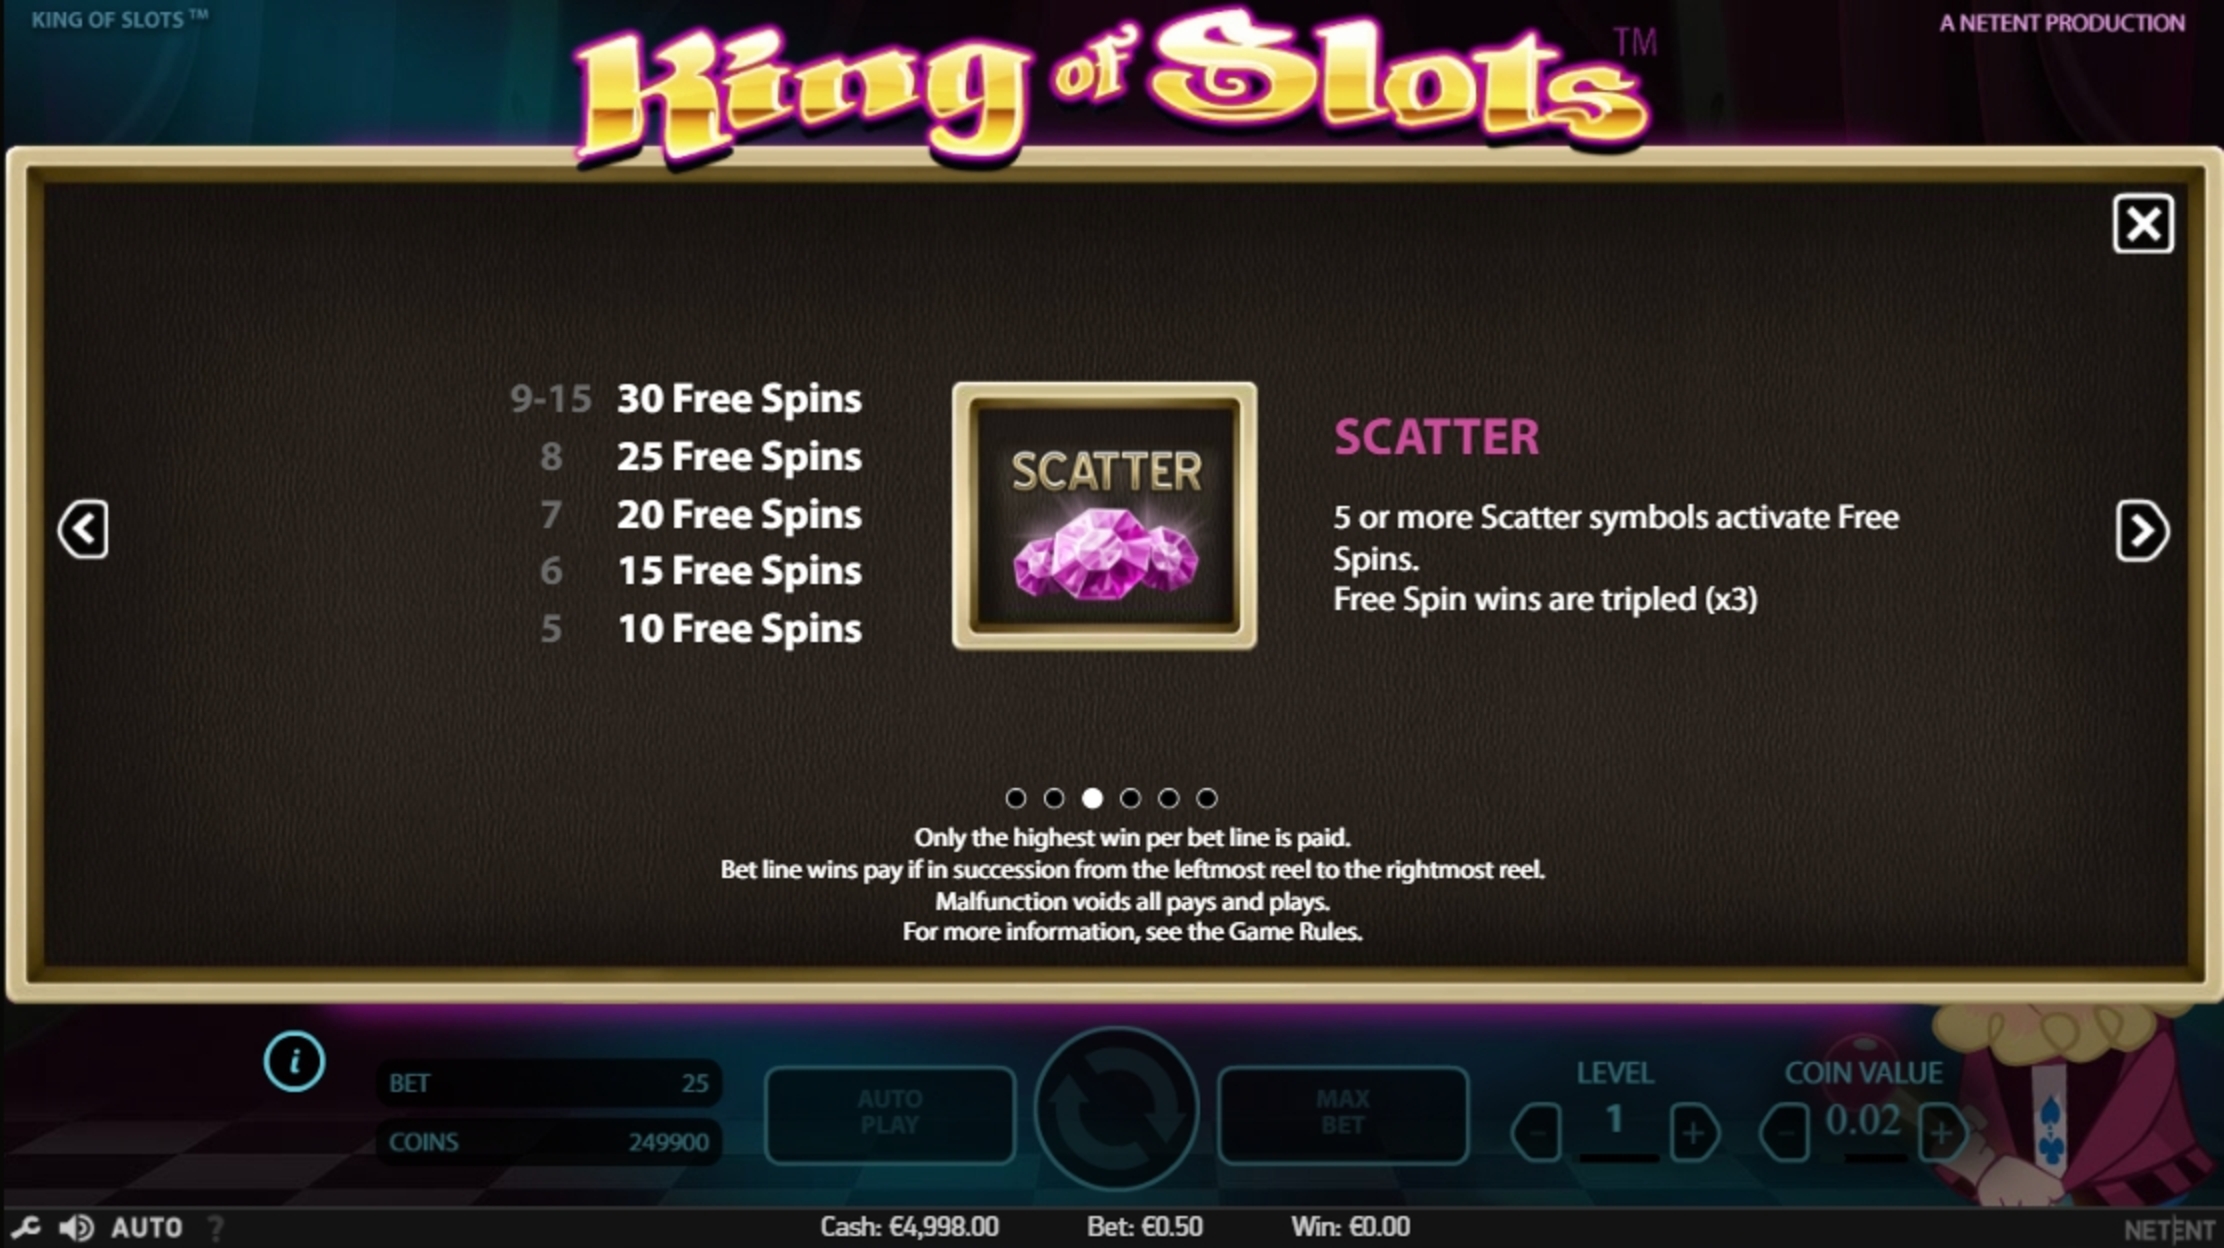 Info of King of Slots Slot Game by NetEnt